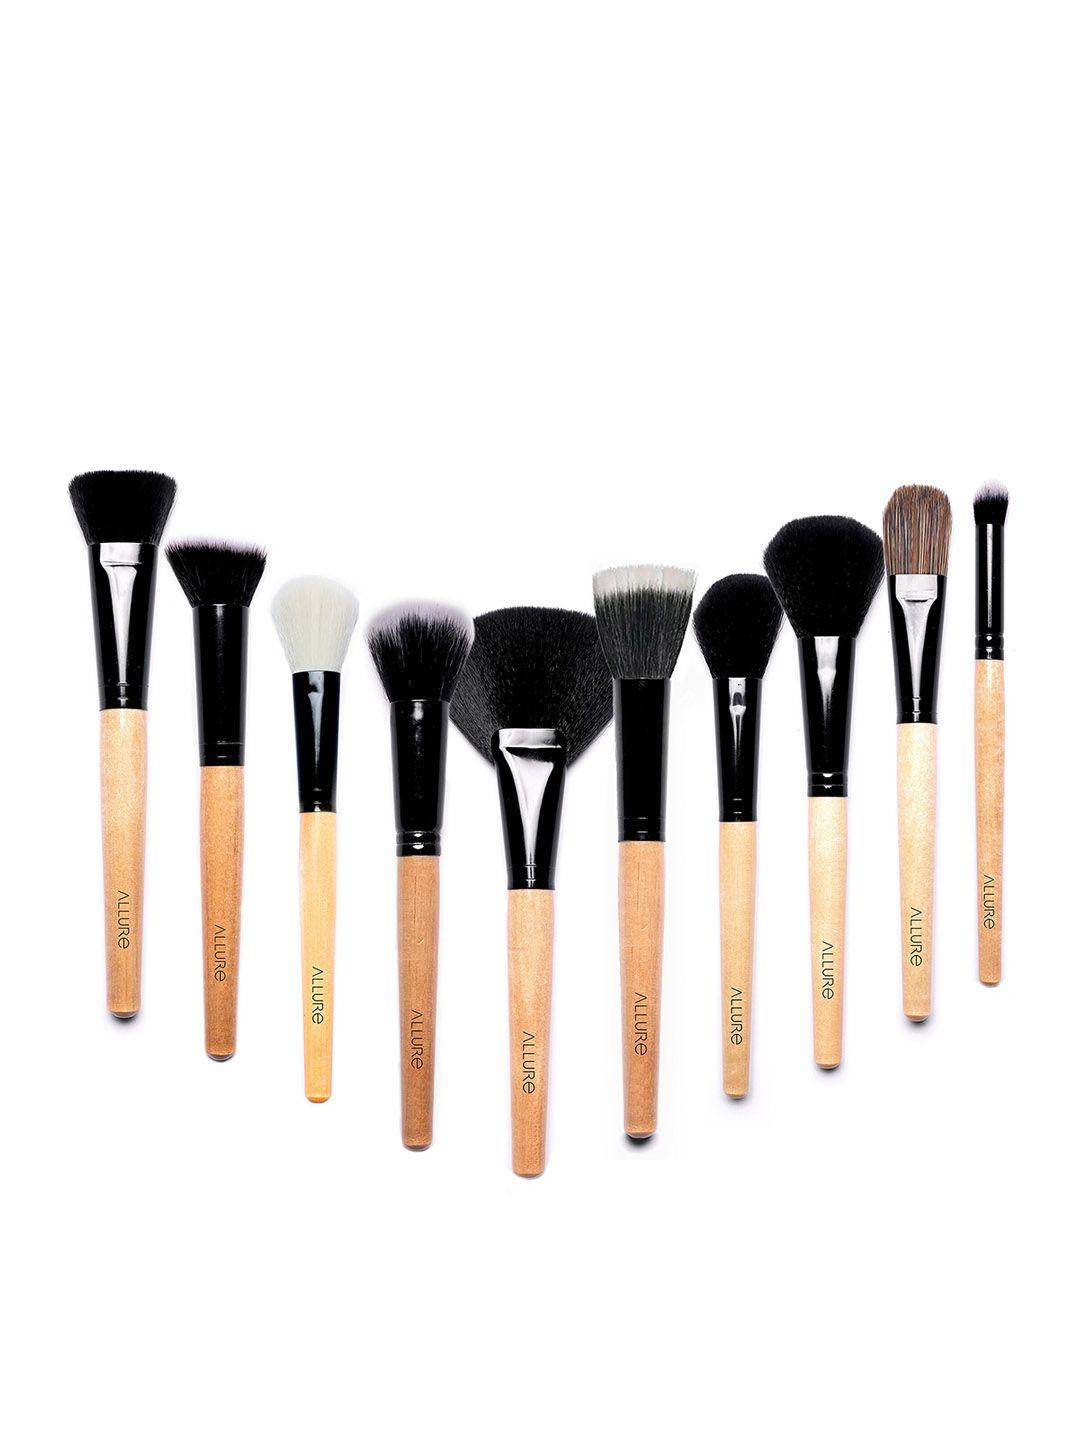 ALLURE Set of 10 Wooden Classic Makeup Brushes ACKF-10 Price in India